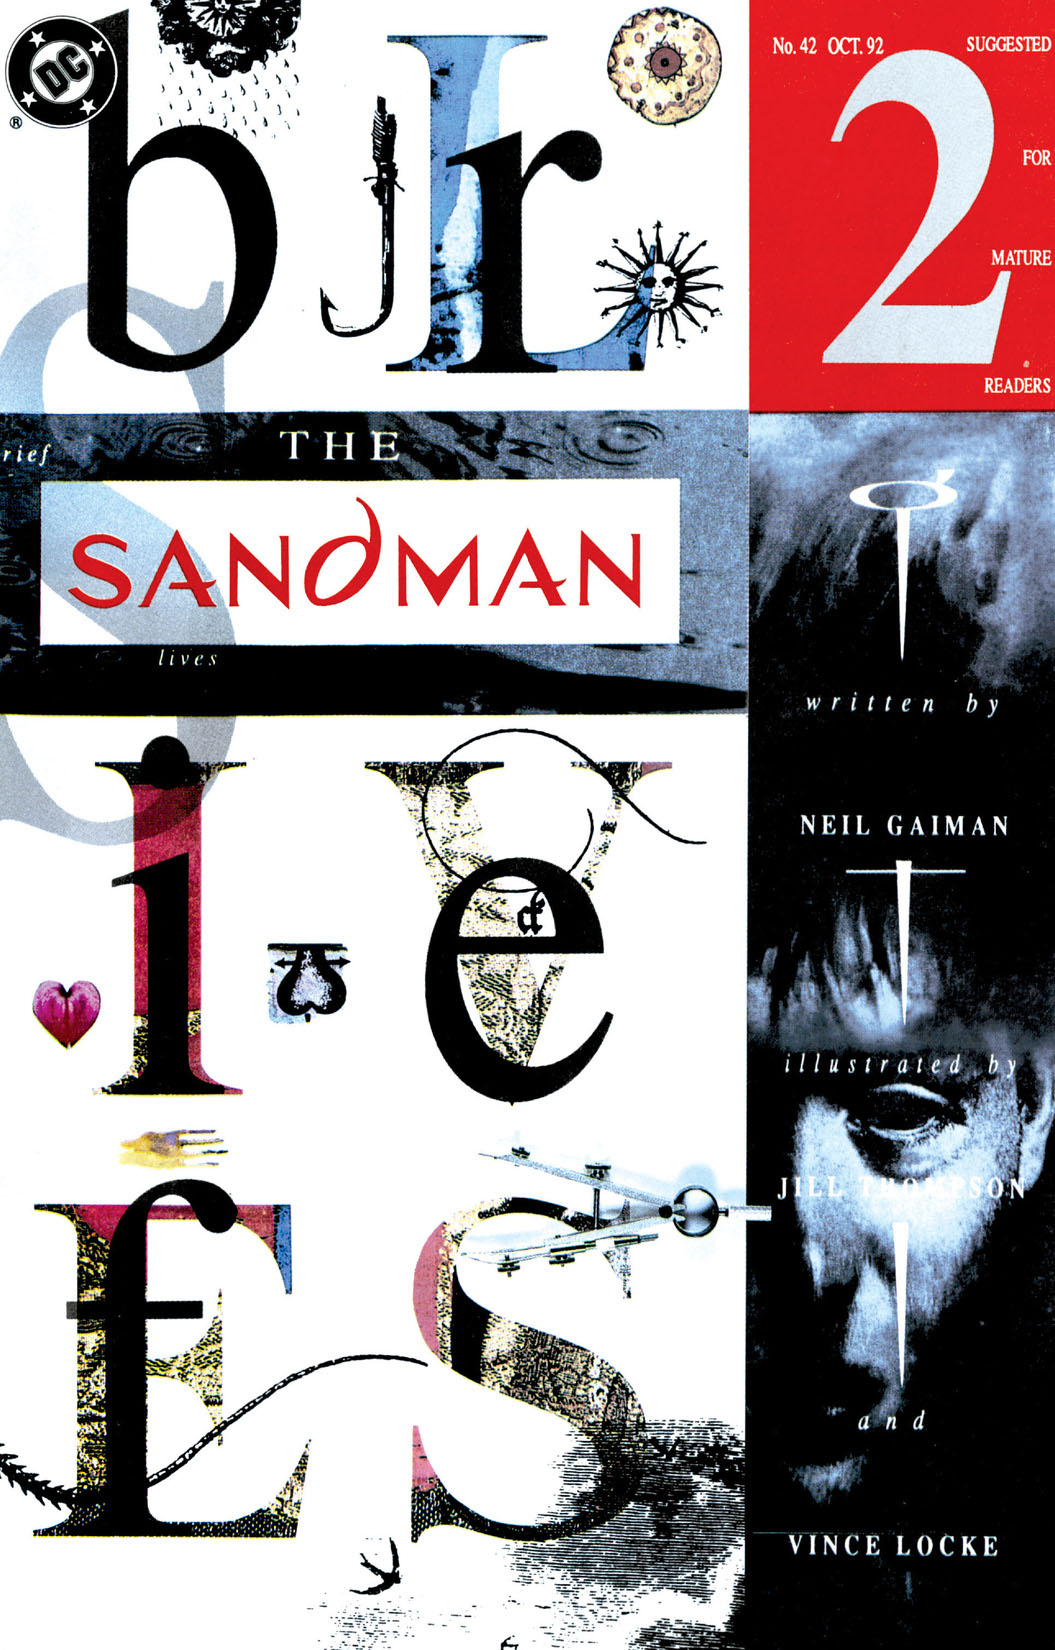 The Sandman #42 preview images